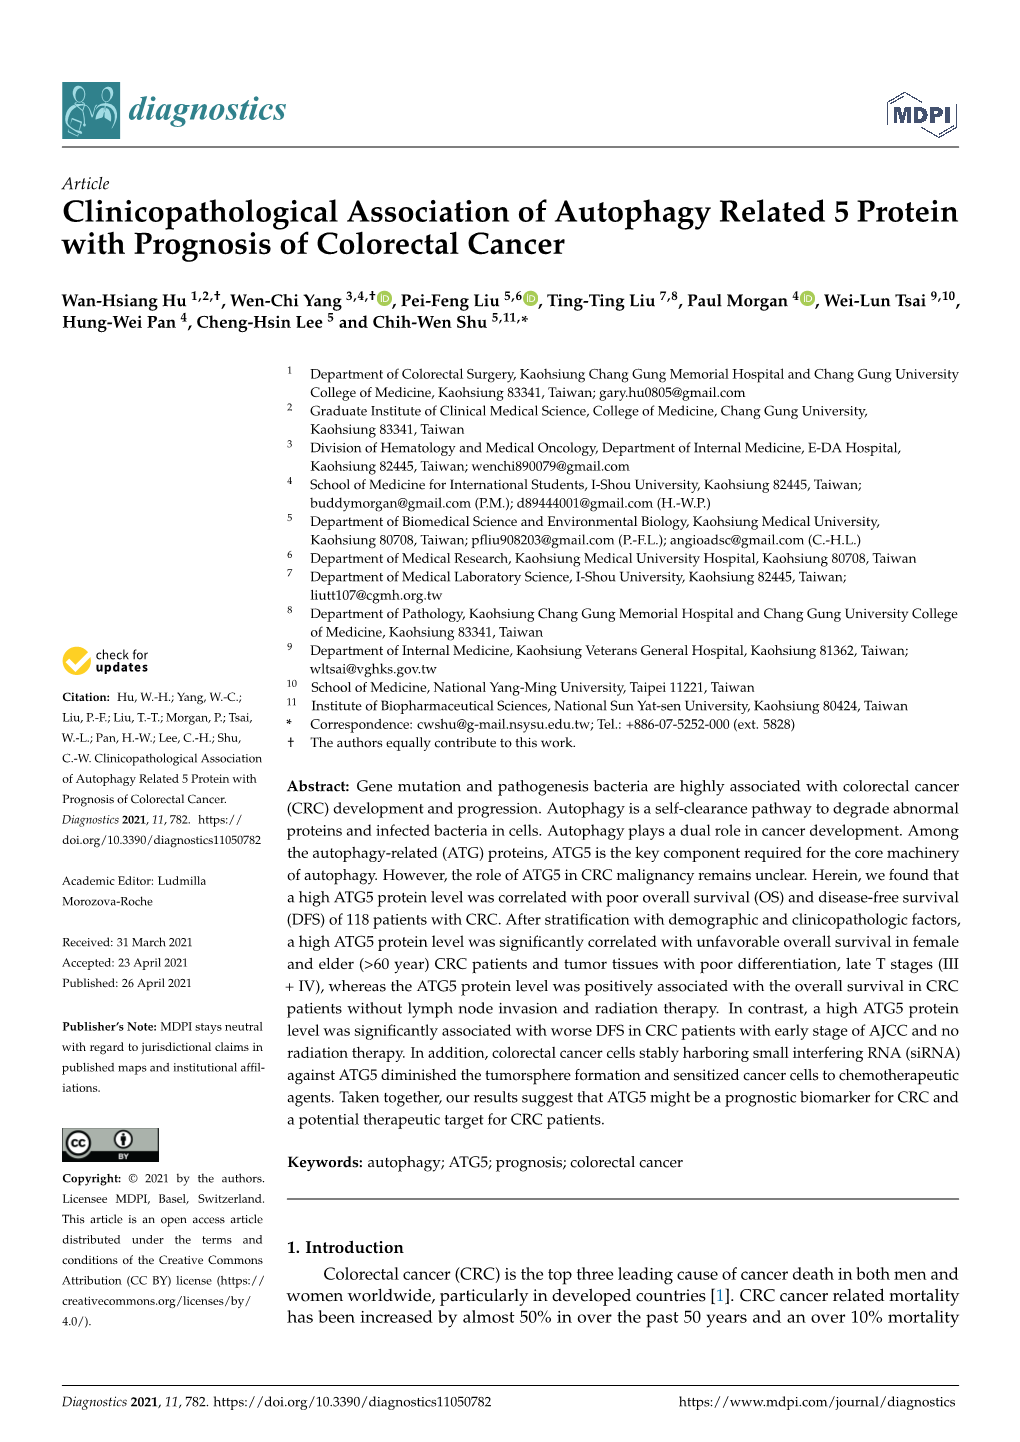 Clinicopathological Association of Autophagy Related 5 Protein with Prognosis of Colorectal Cancer